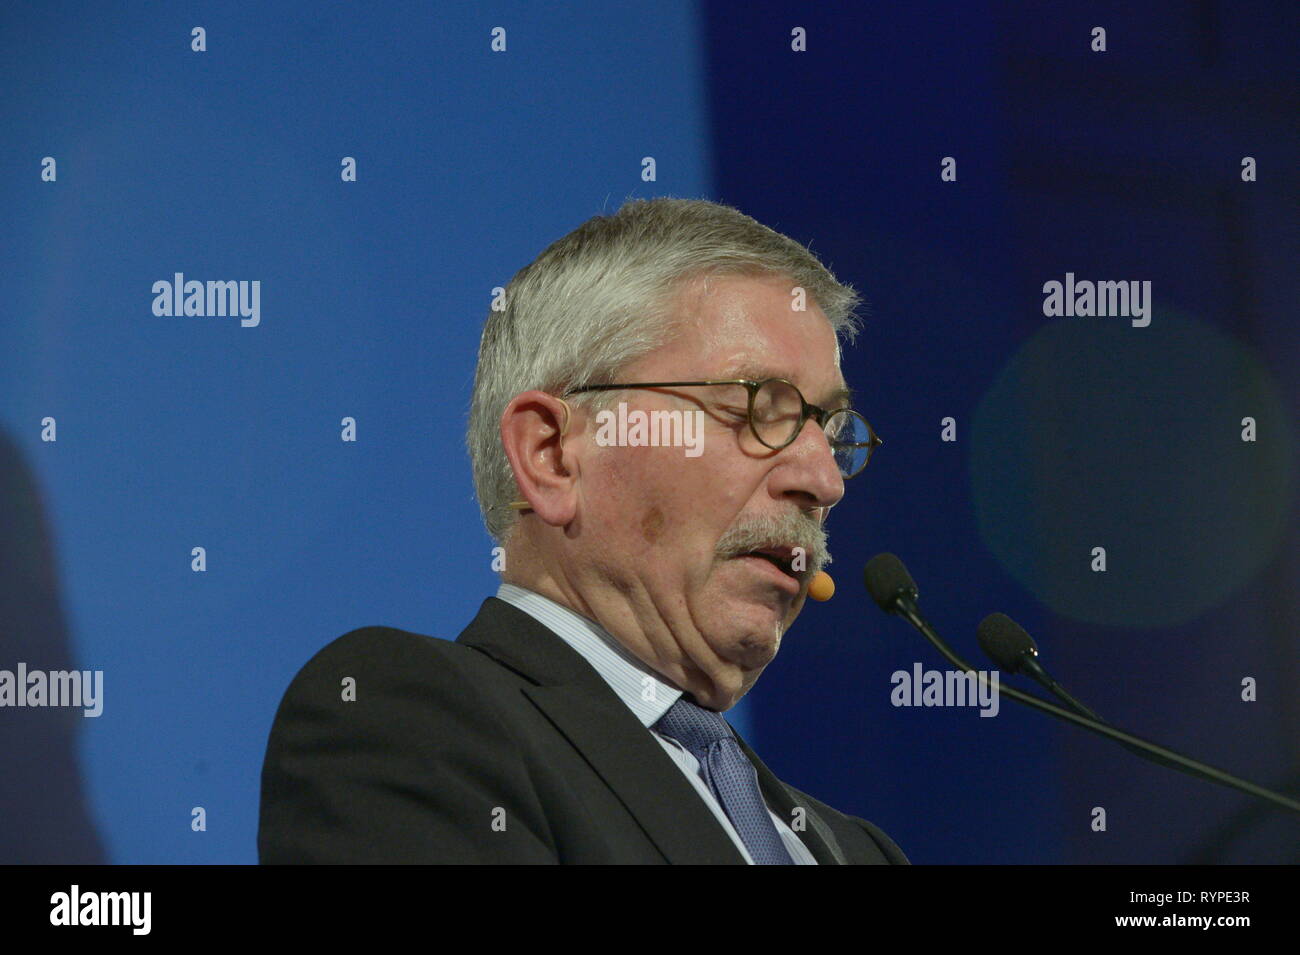 Vienna, Austria. March 14, 2019. Presentation of the book "Enemy Takeover" by Thilo Sarrazin. Podium Discussion of the liberal Academy(FPÖ) in Sofiensäle. Picture shows author Thilo Sarrazin. Credit: Franz Perc / Alamy Live News Stock Photo